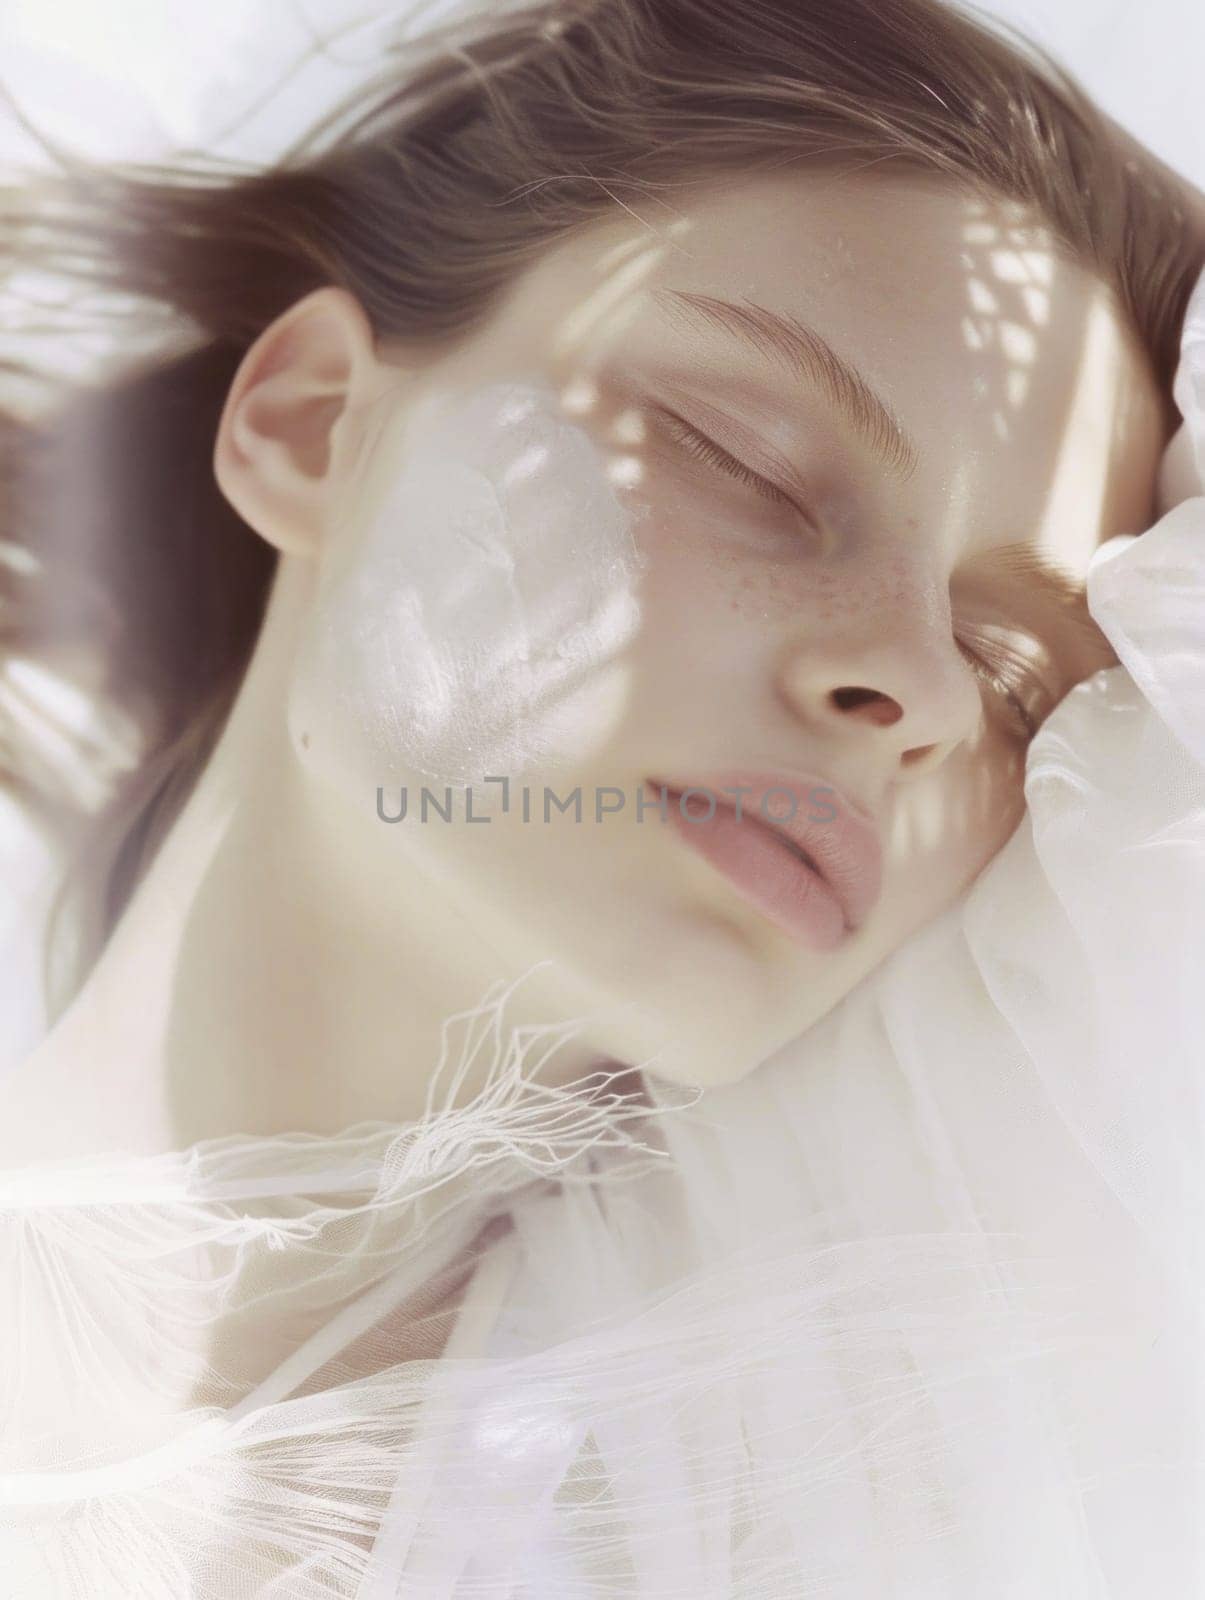 Peaceful woman sleeping comfortably under white sheet in relaxing atmosphere for health and wellness concepts